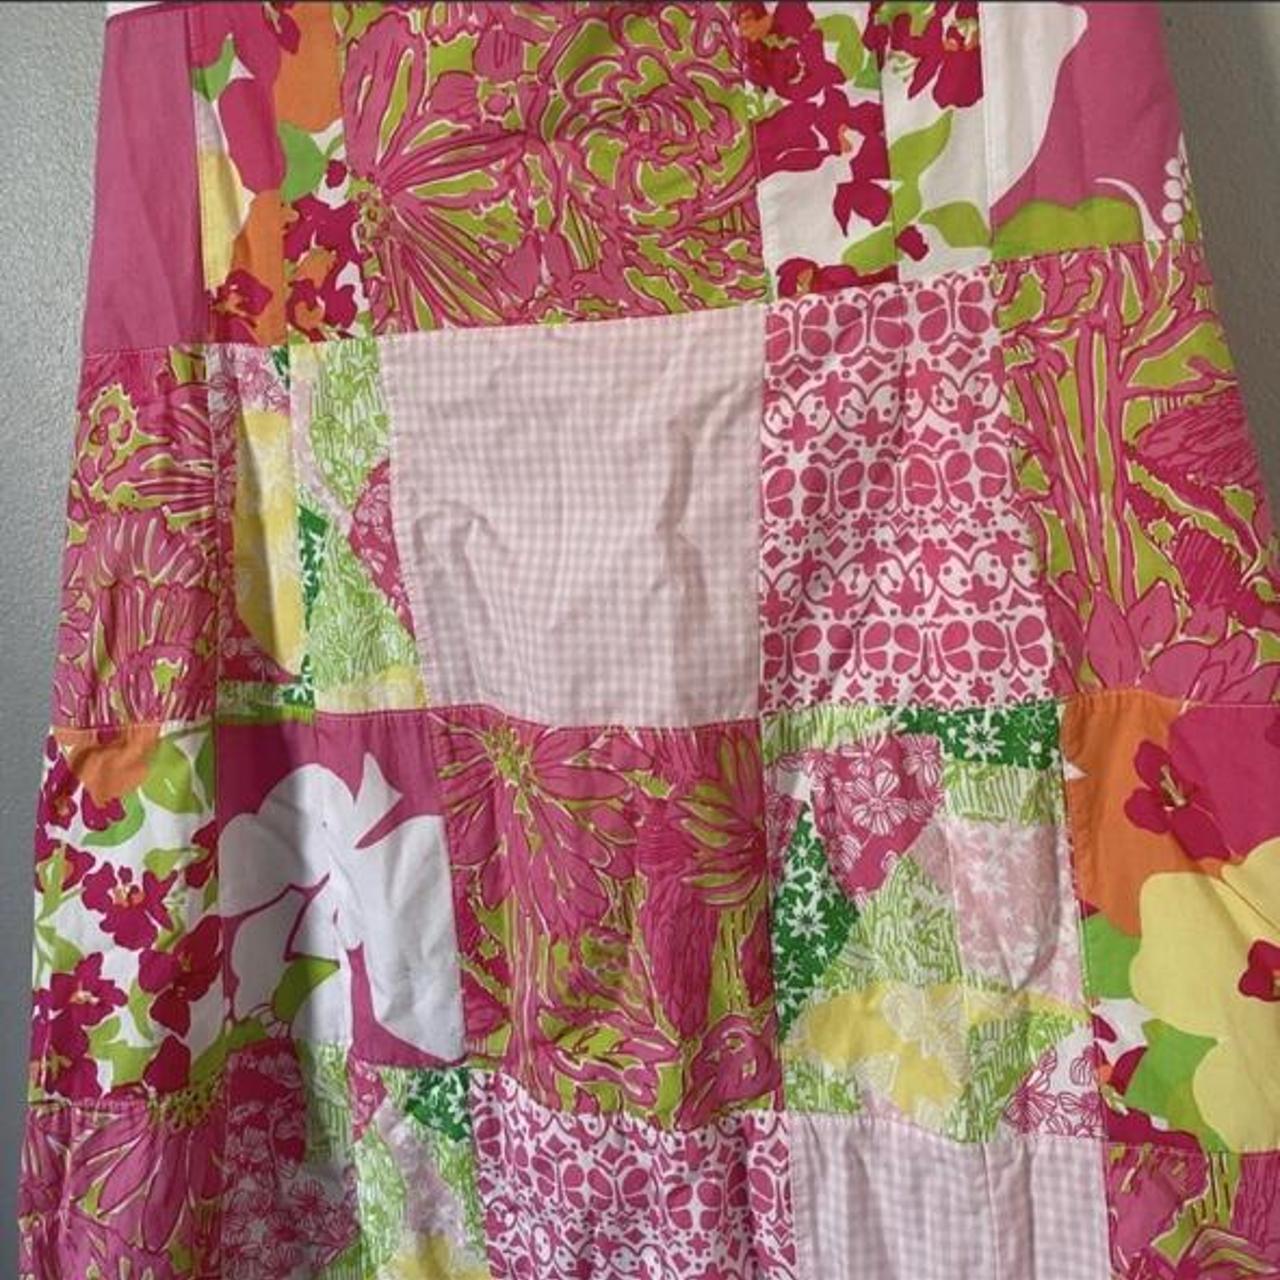 Lilly Pulitzer Women's Pink and White Dress (3)